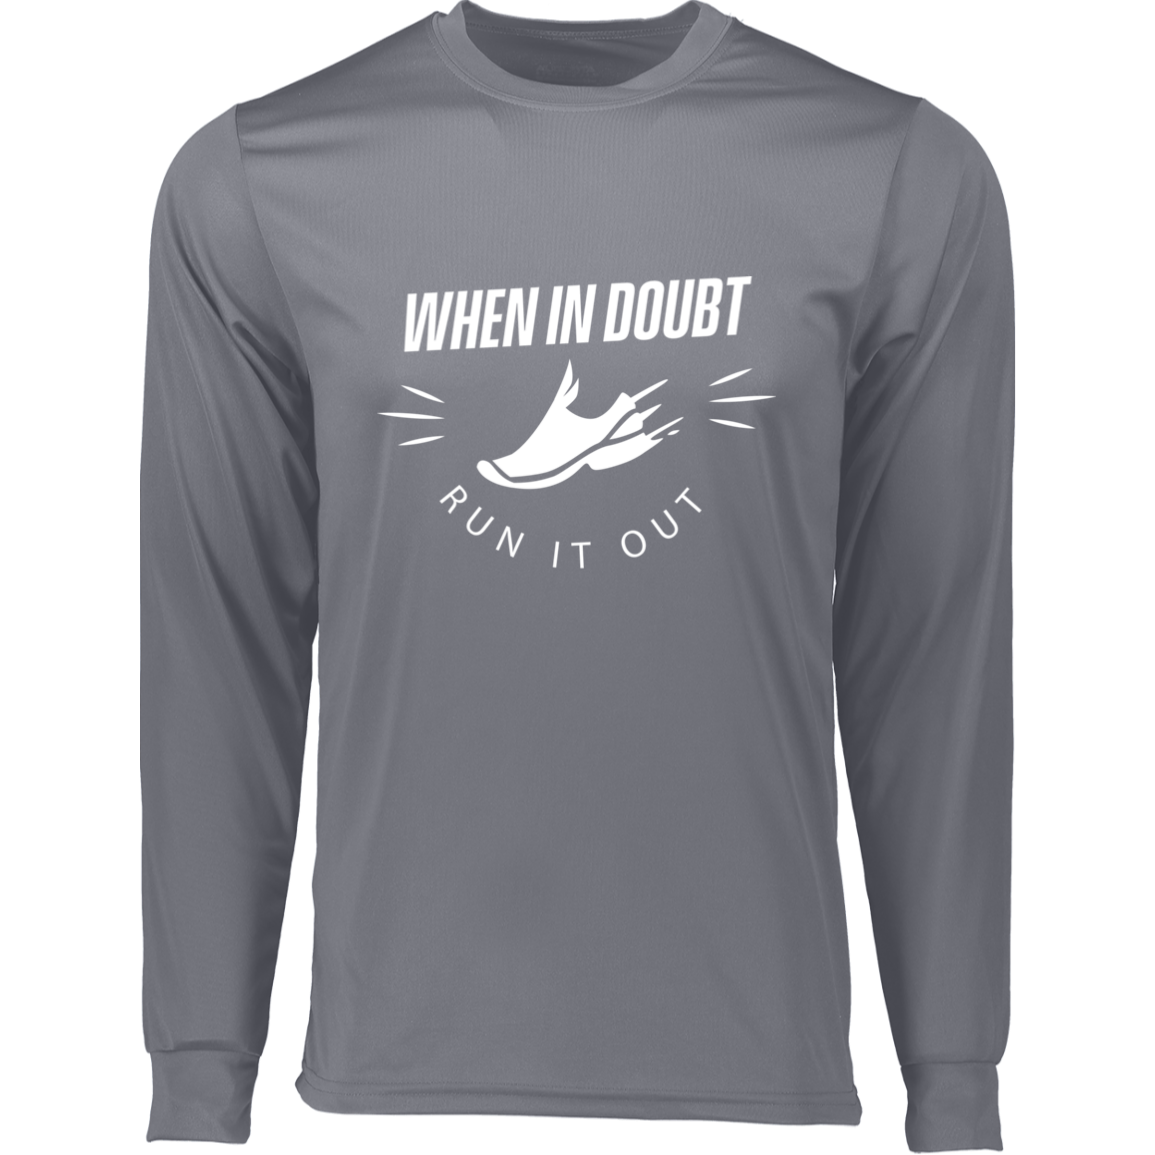 Men's Heather Performance long sleeve- Run it out